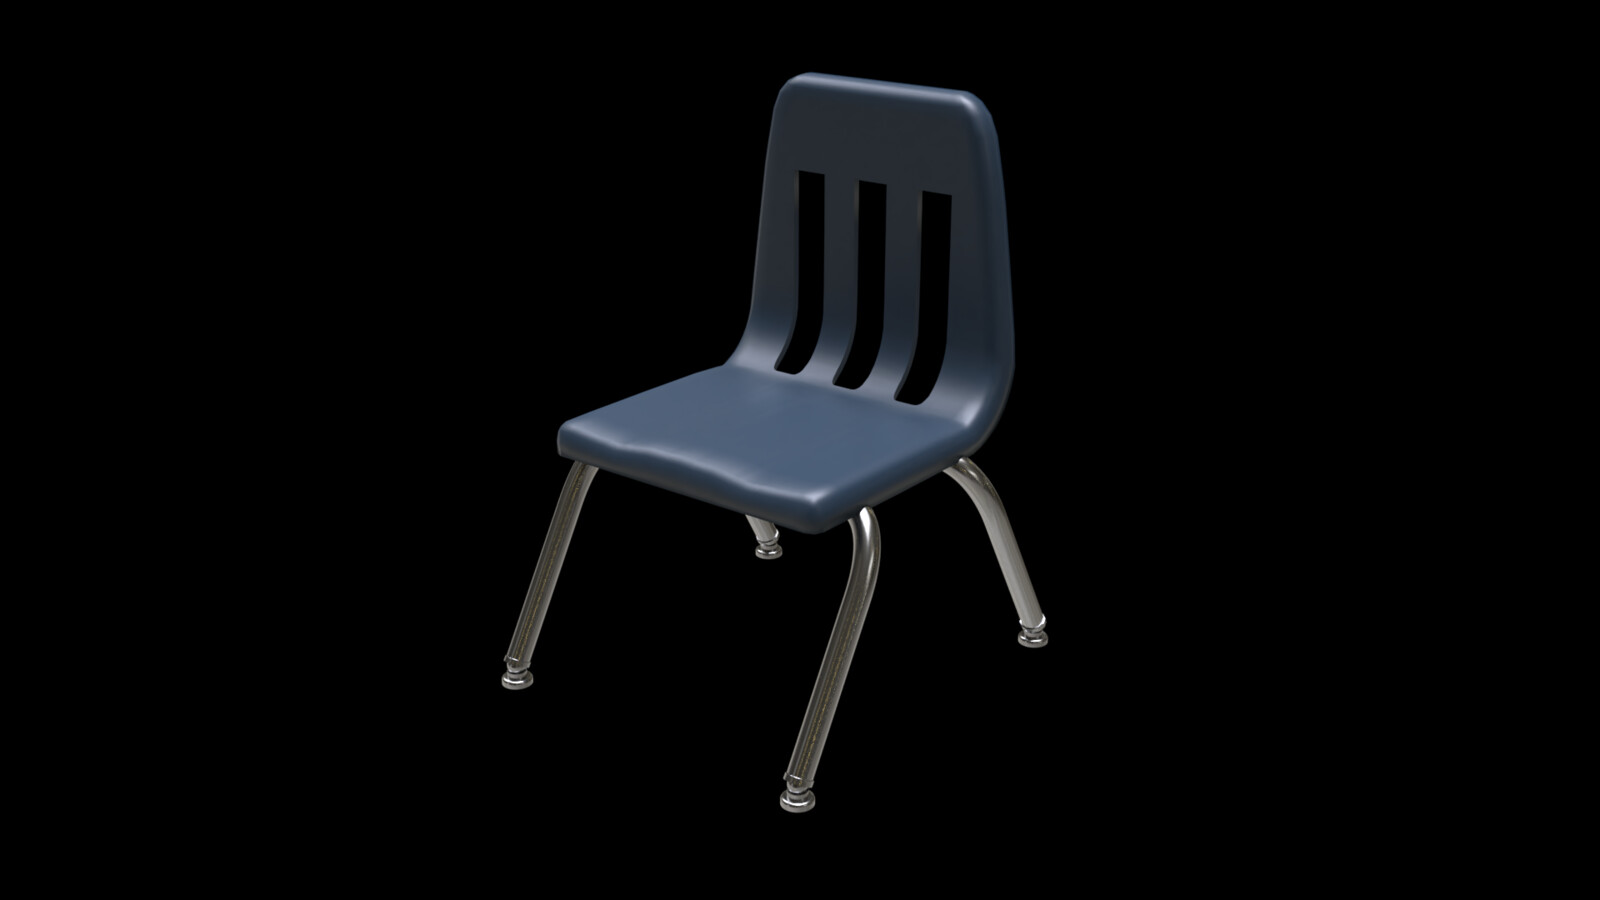 Student chair 2 render 1